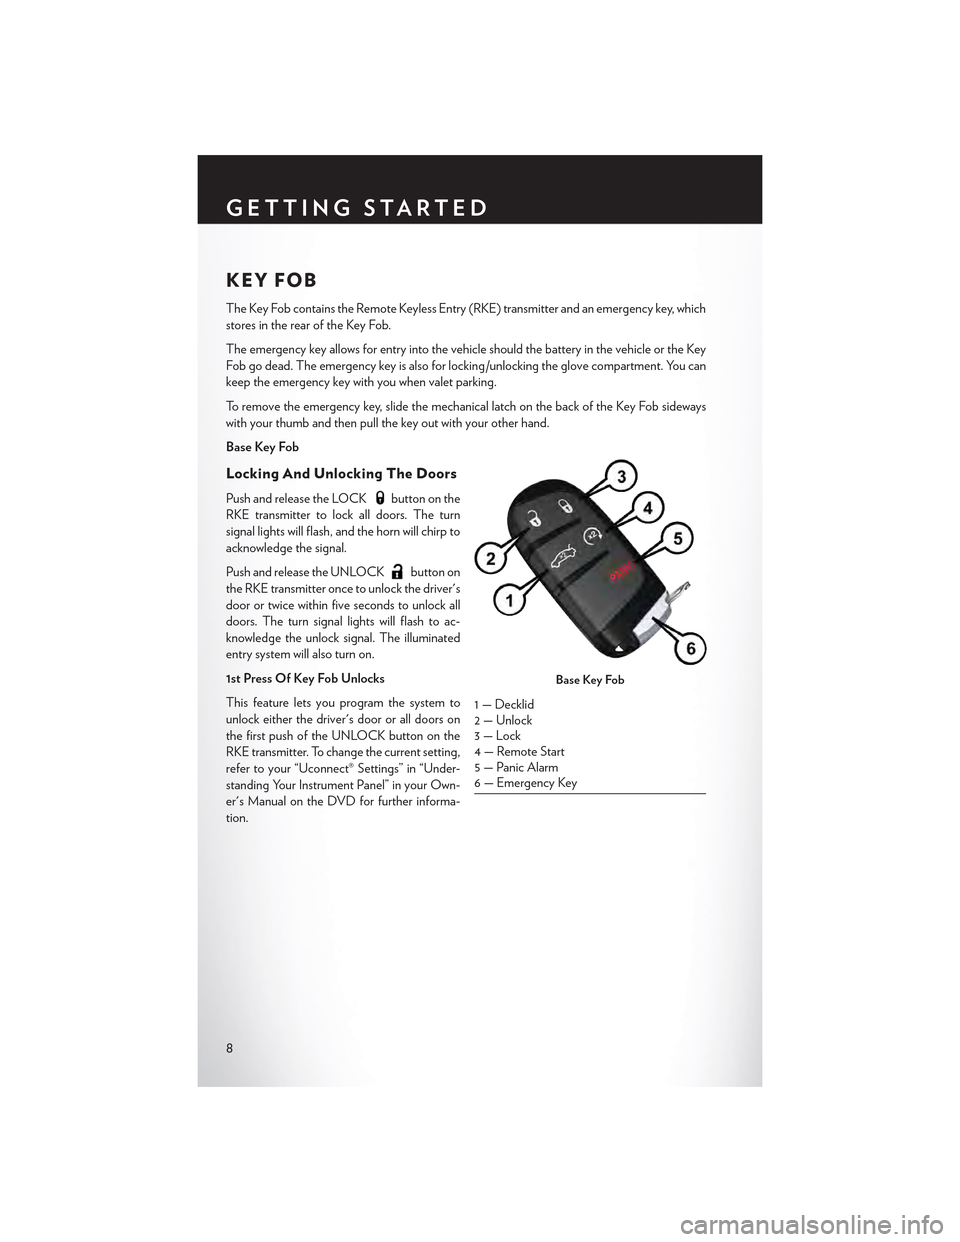 CHRYSLER 300 2015 2.G User Guide KEY FOB
The Key Fob contains the Remote Keyless Entry (RKE) transmitter and an emergency key, which
stores in the rear of the Key Fob.
The emergency key allows for entry into the vehicle should the ba